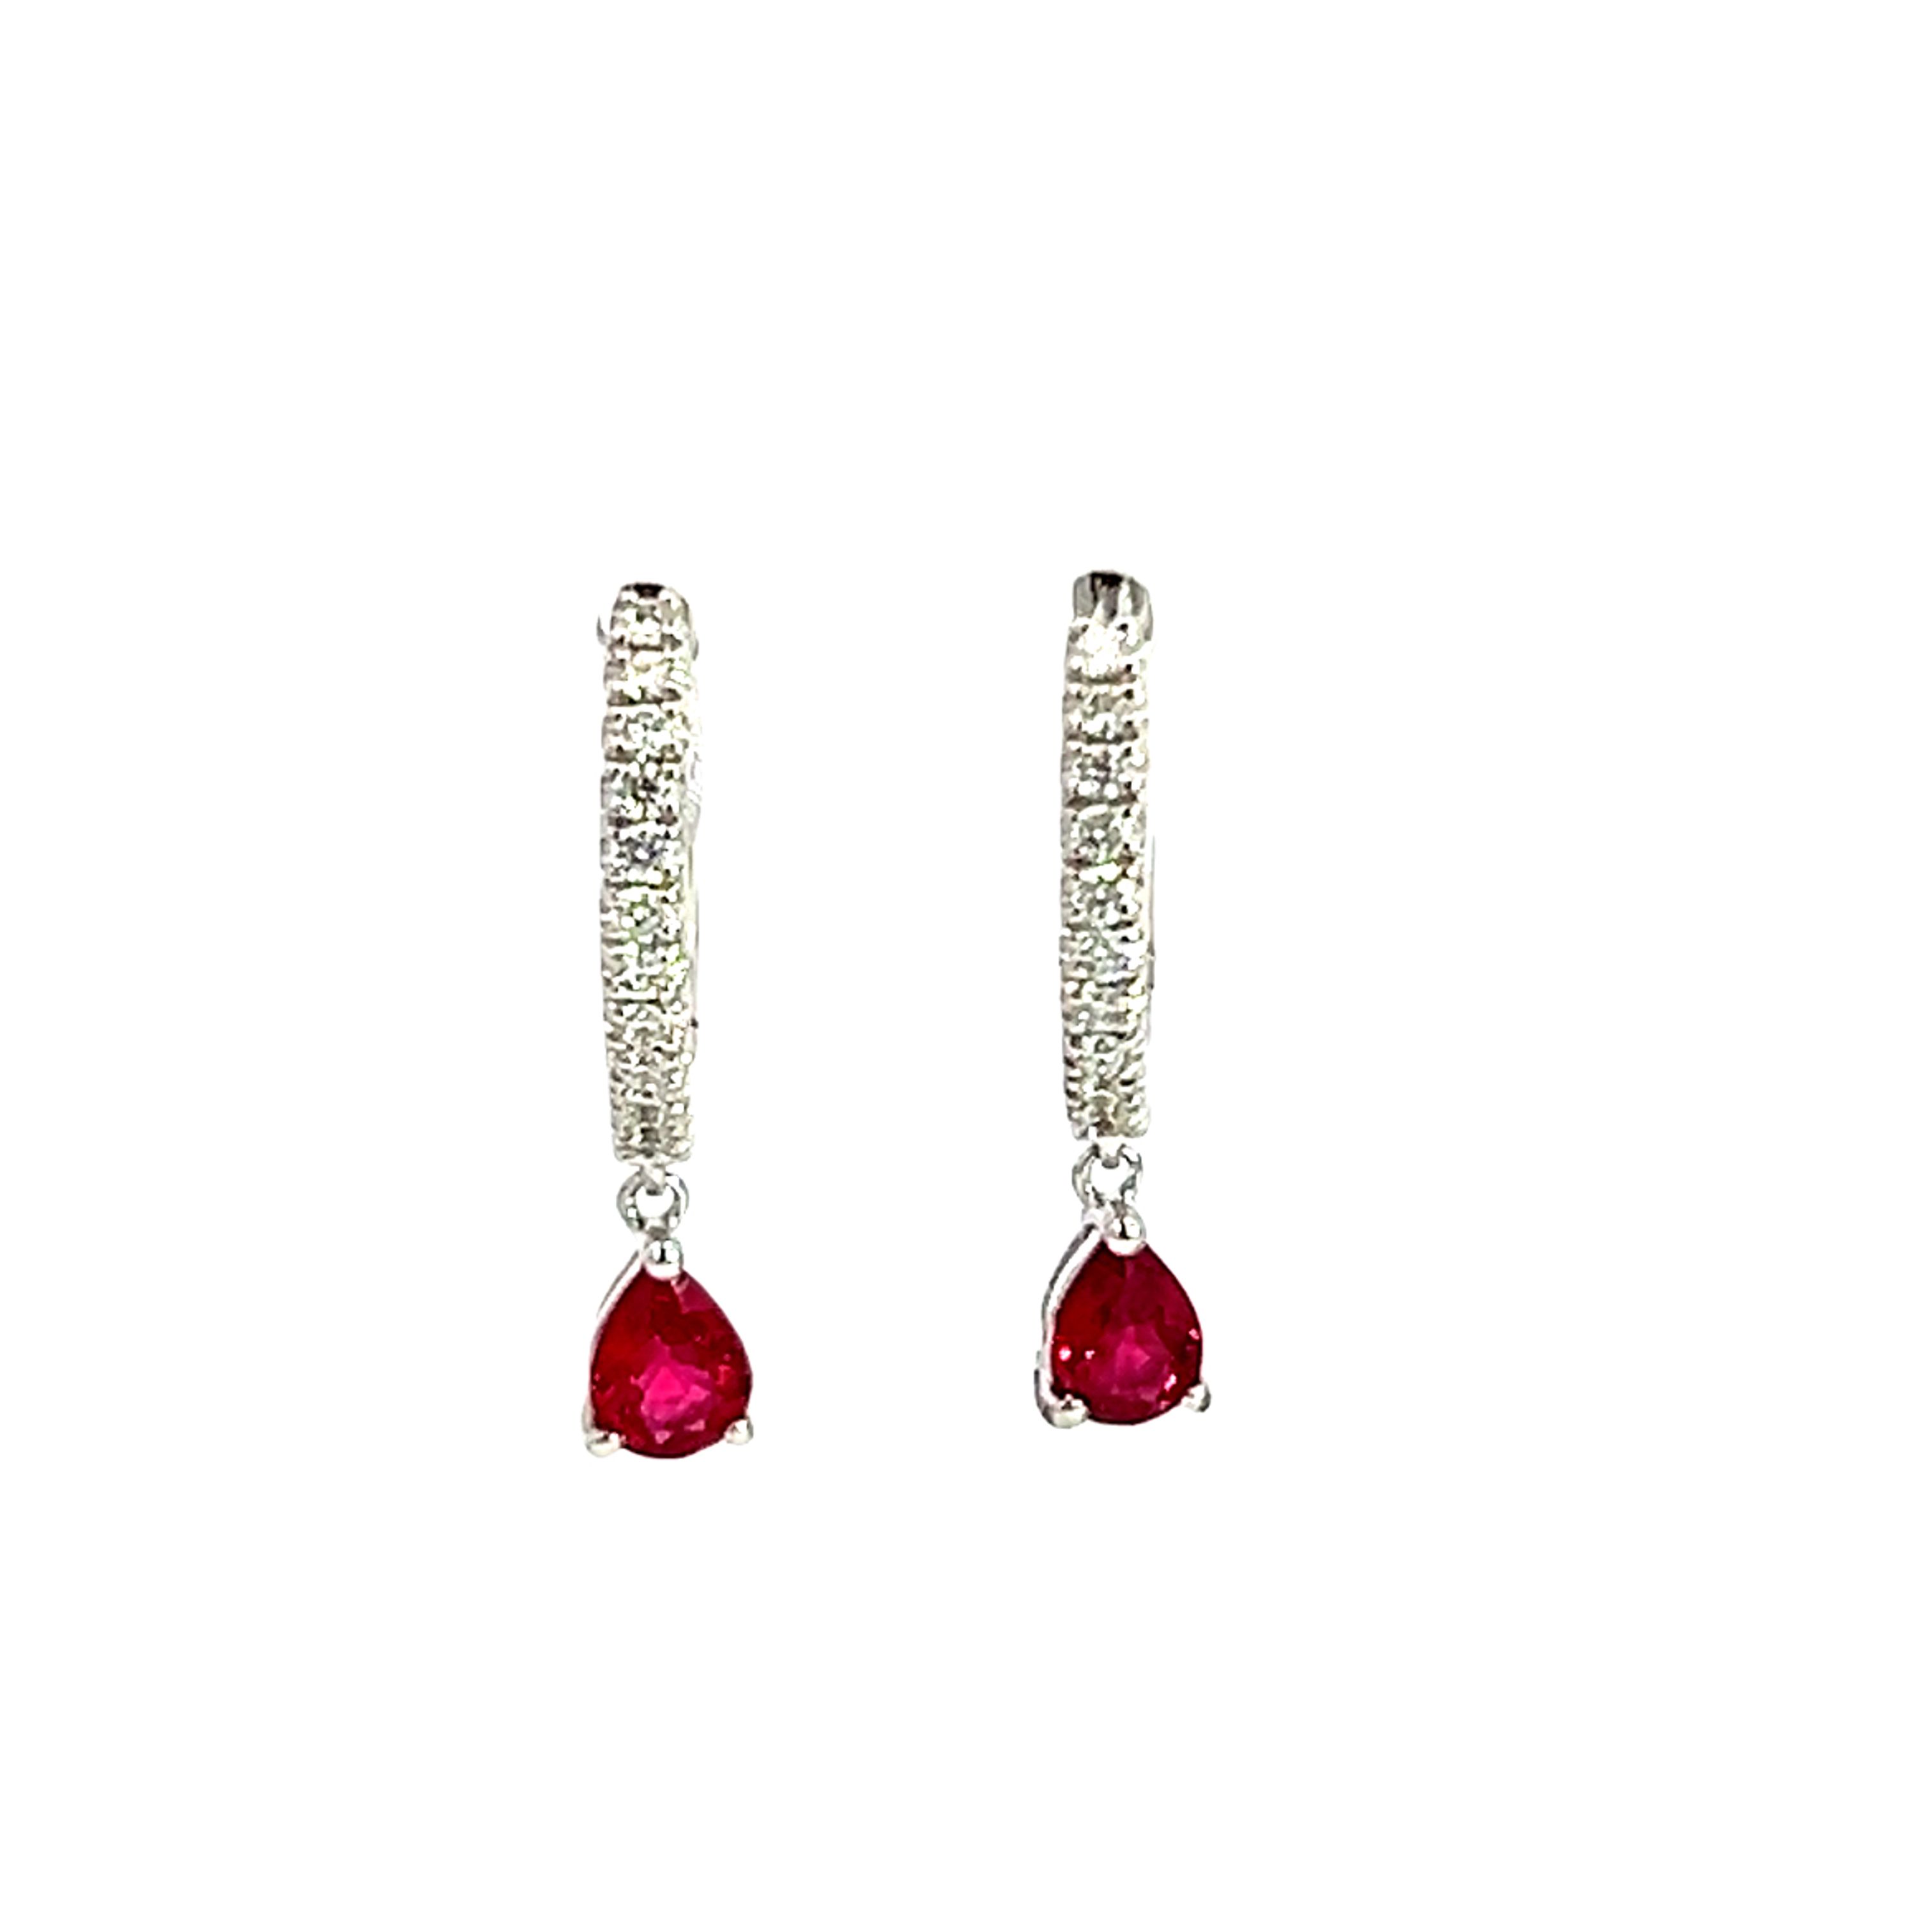 18 Carat White Gold Diamond Hoops with Ruby Drop